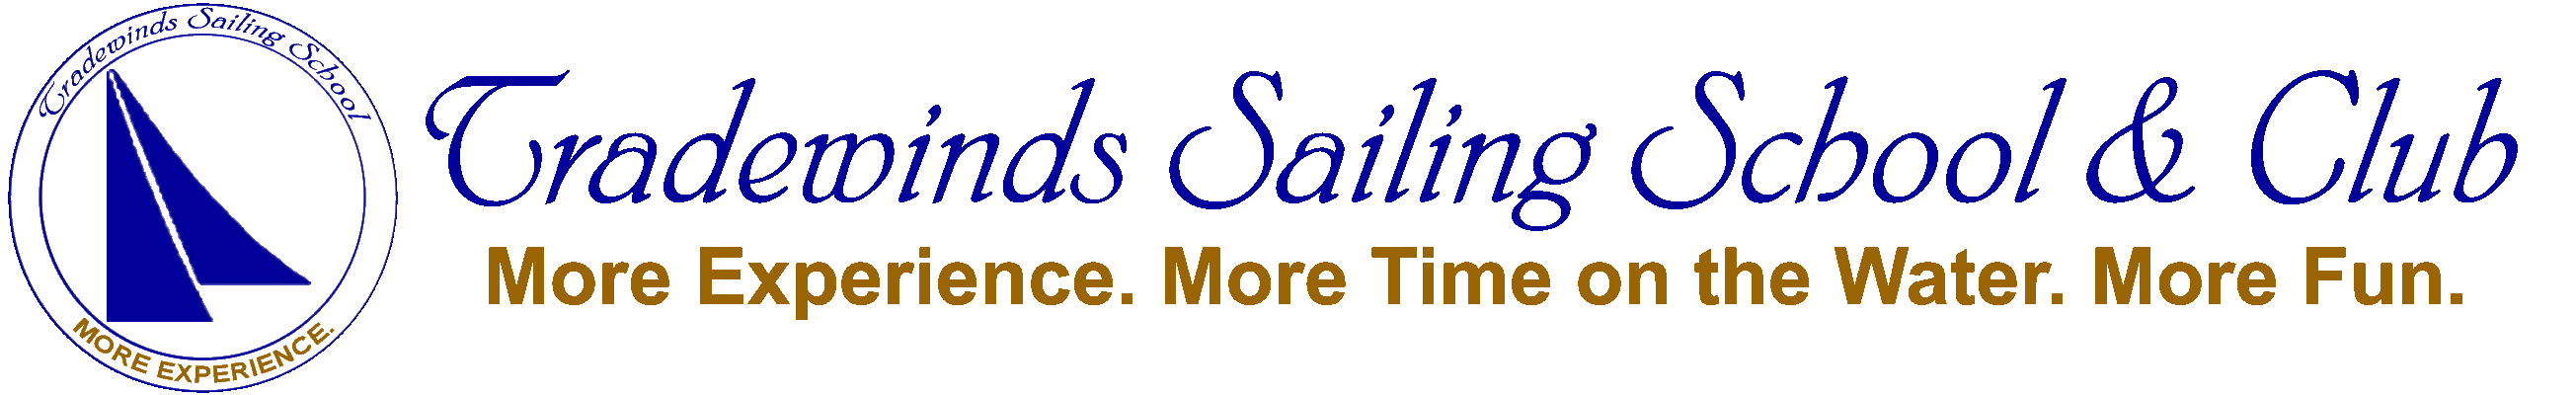 Learn to sail on San Francisco Bay. Tradewinds stands apart from other sailing schools. Stop by and visit our sailing school and club.